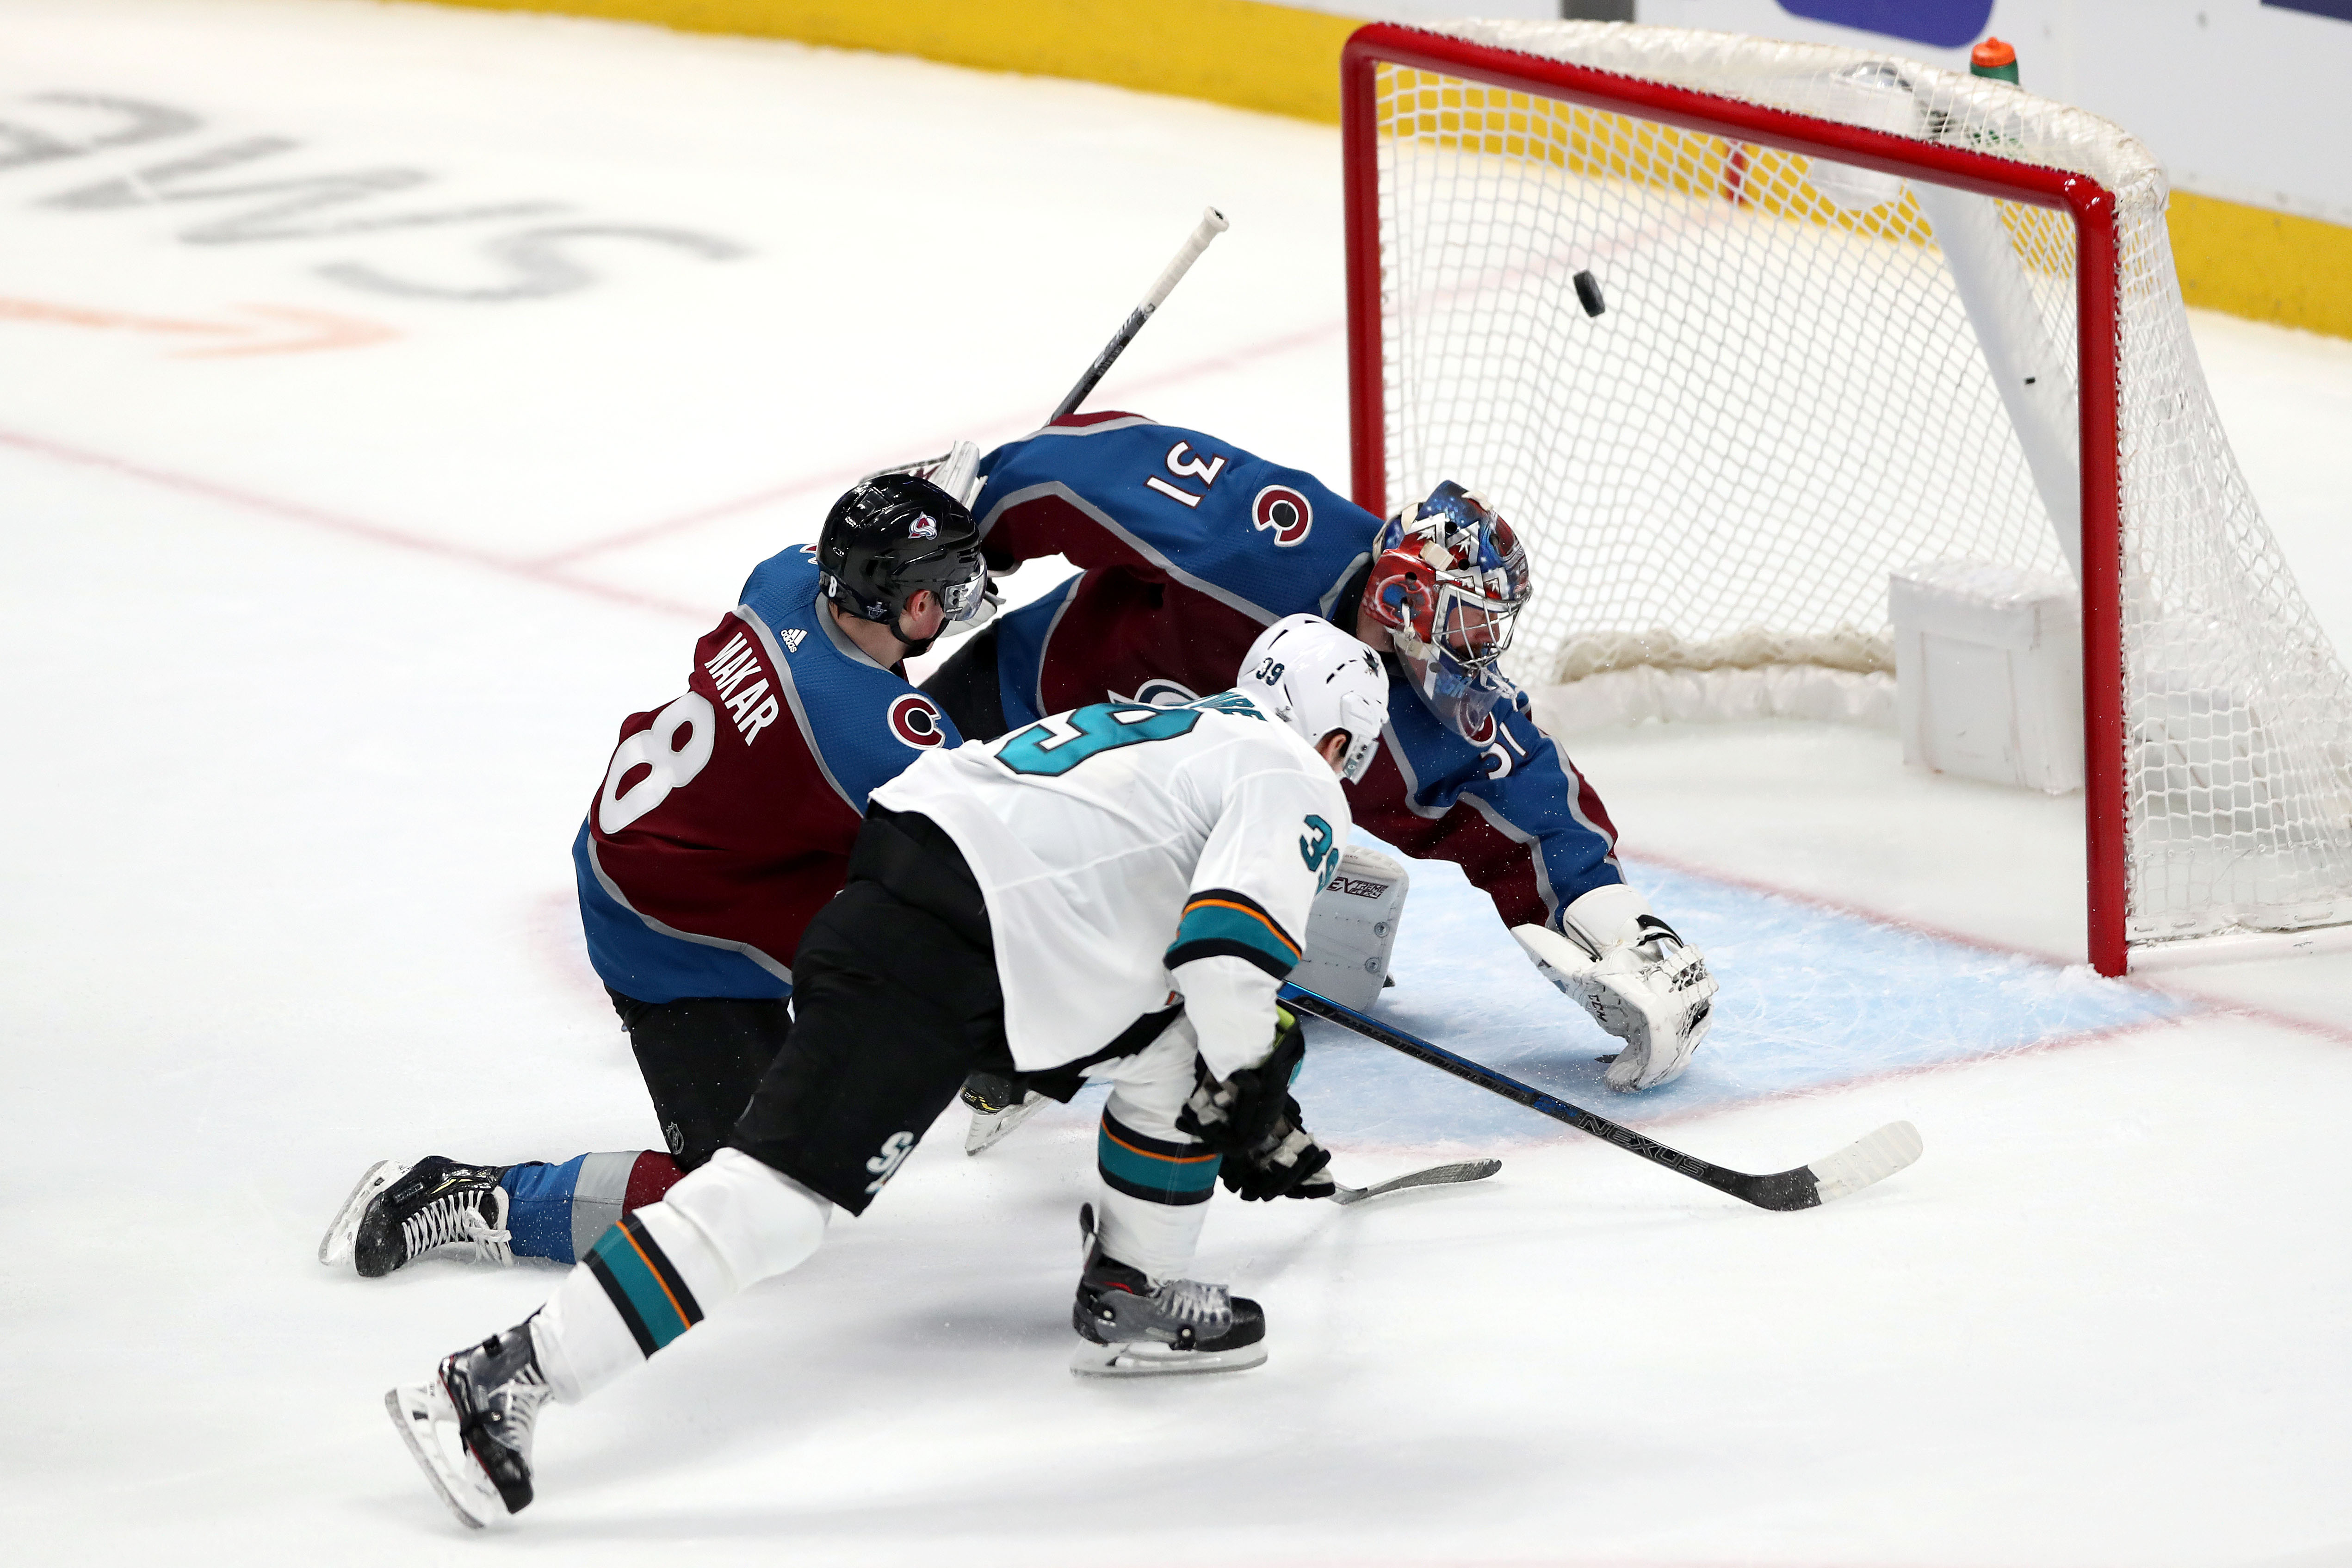 Logan Couture of the San Jose Sharks scores a goal past Cale Makar and goalie Philipp Grubauer of the Colorado Avalanche in Game 3 of the Western Conference Second Round during the 2019 NHL Stanley Cup Playoffs at the Pepsi Center on April 30, 2019 in Den